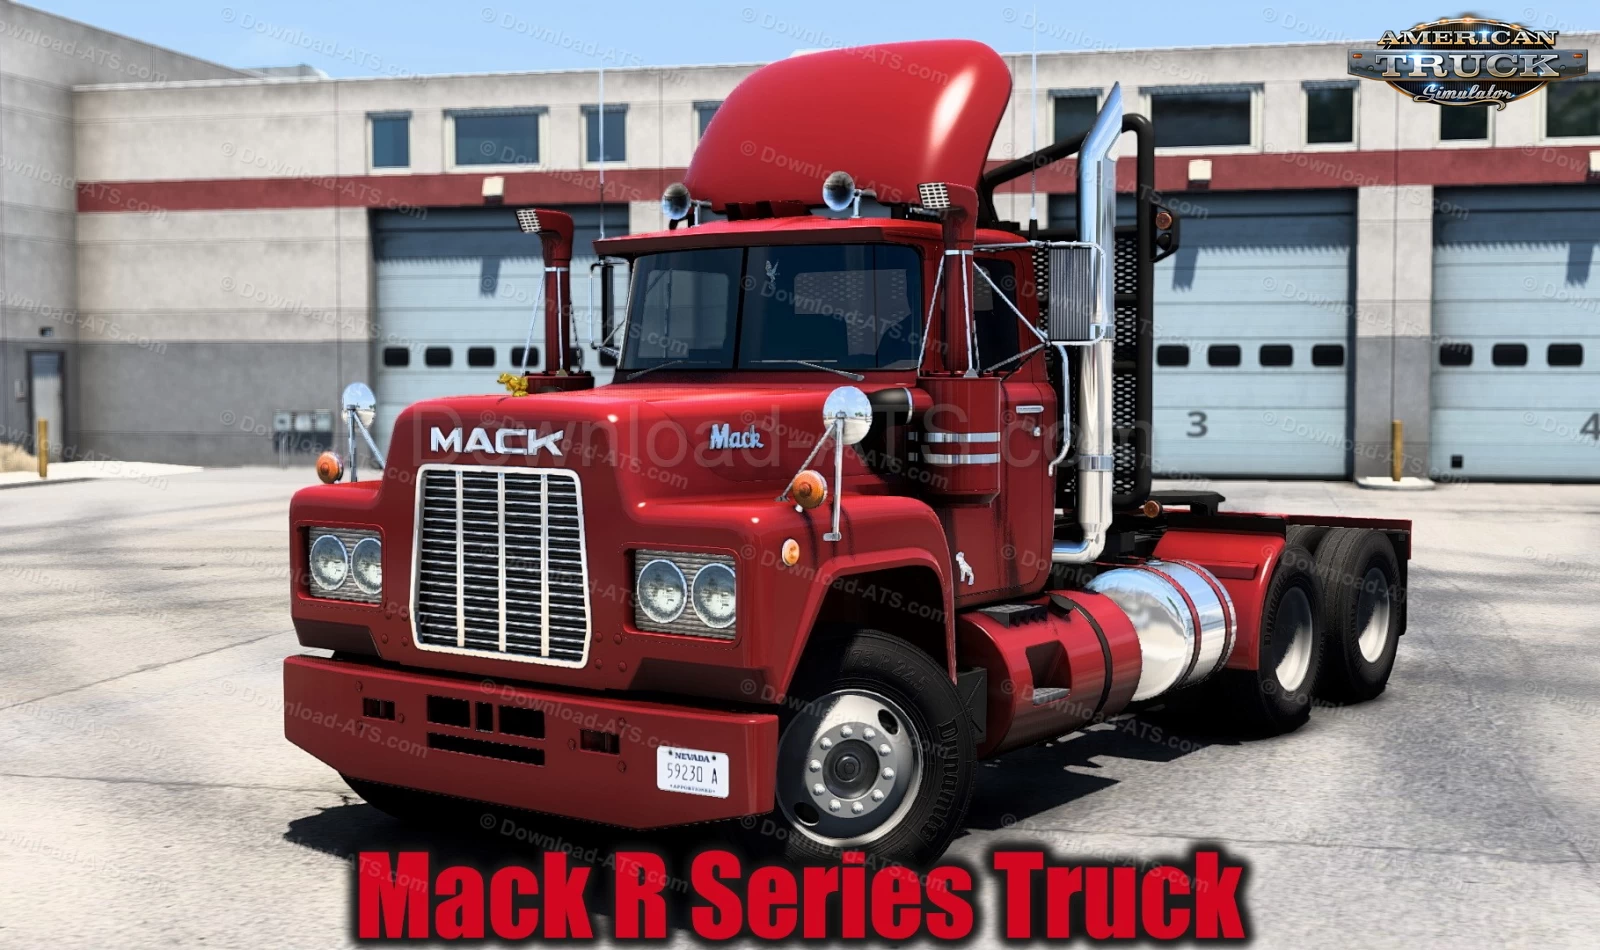 Mack R Series Truck v2.2 by Harven (1.44.x) for ATS